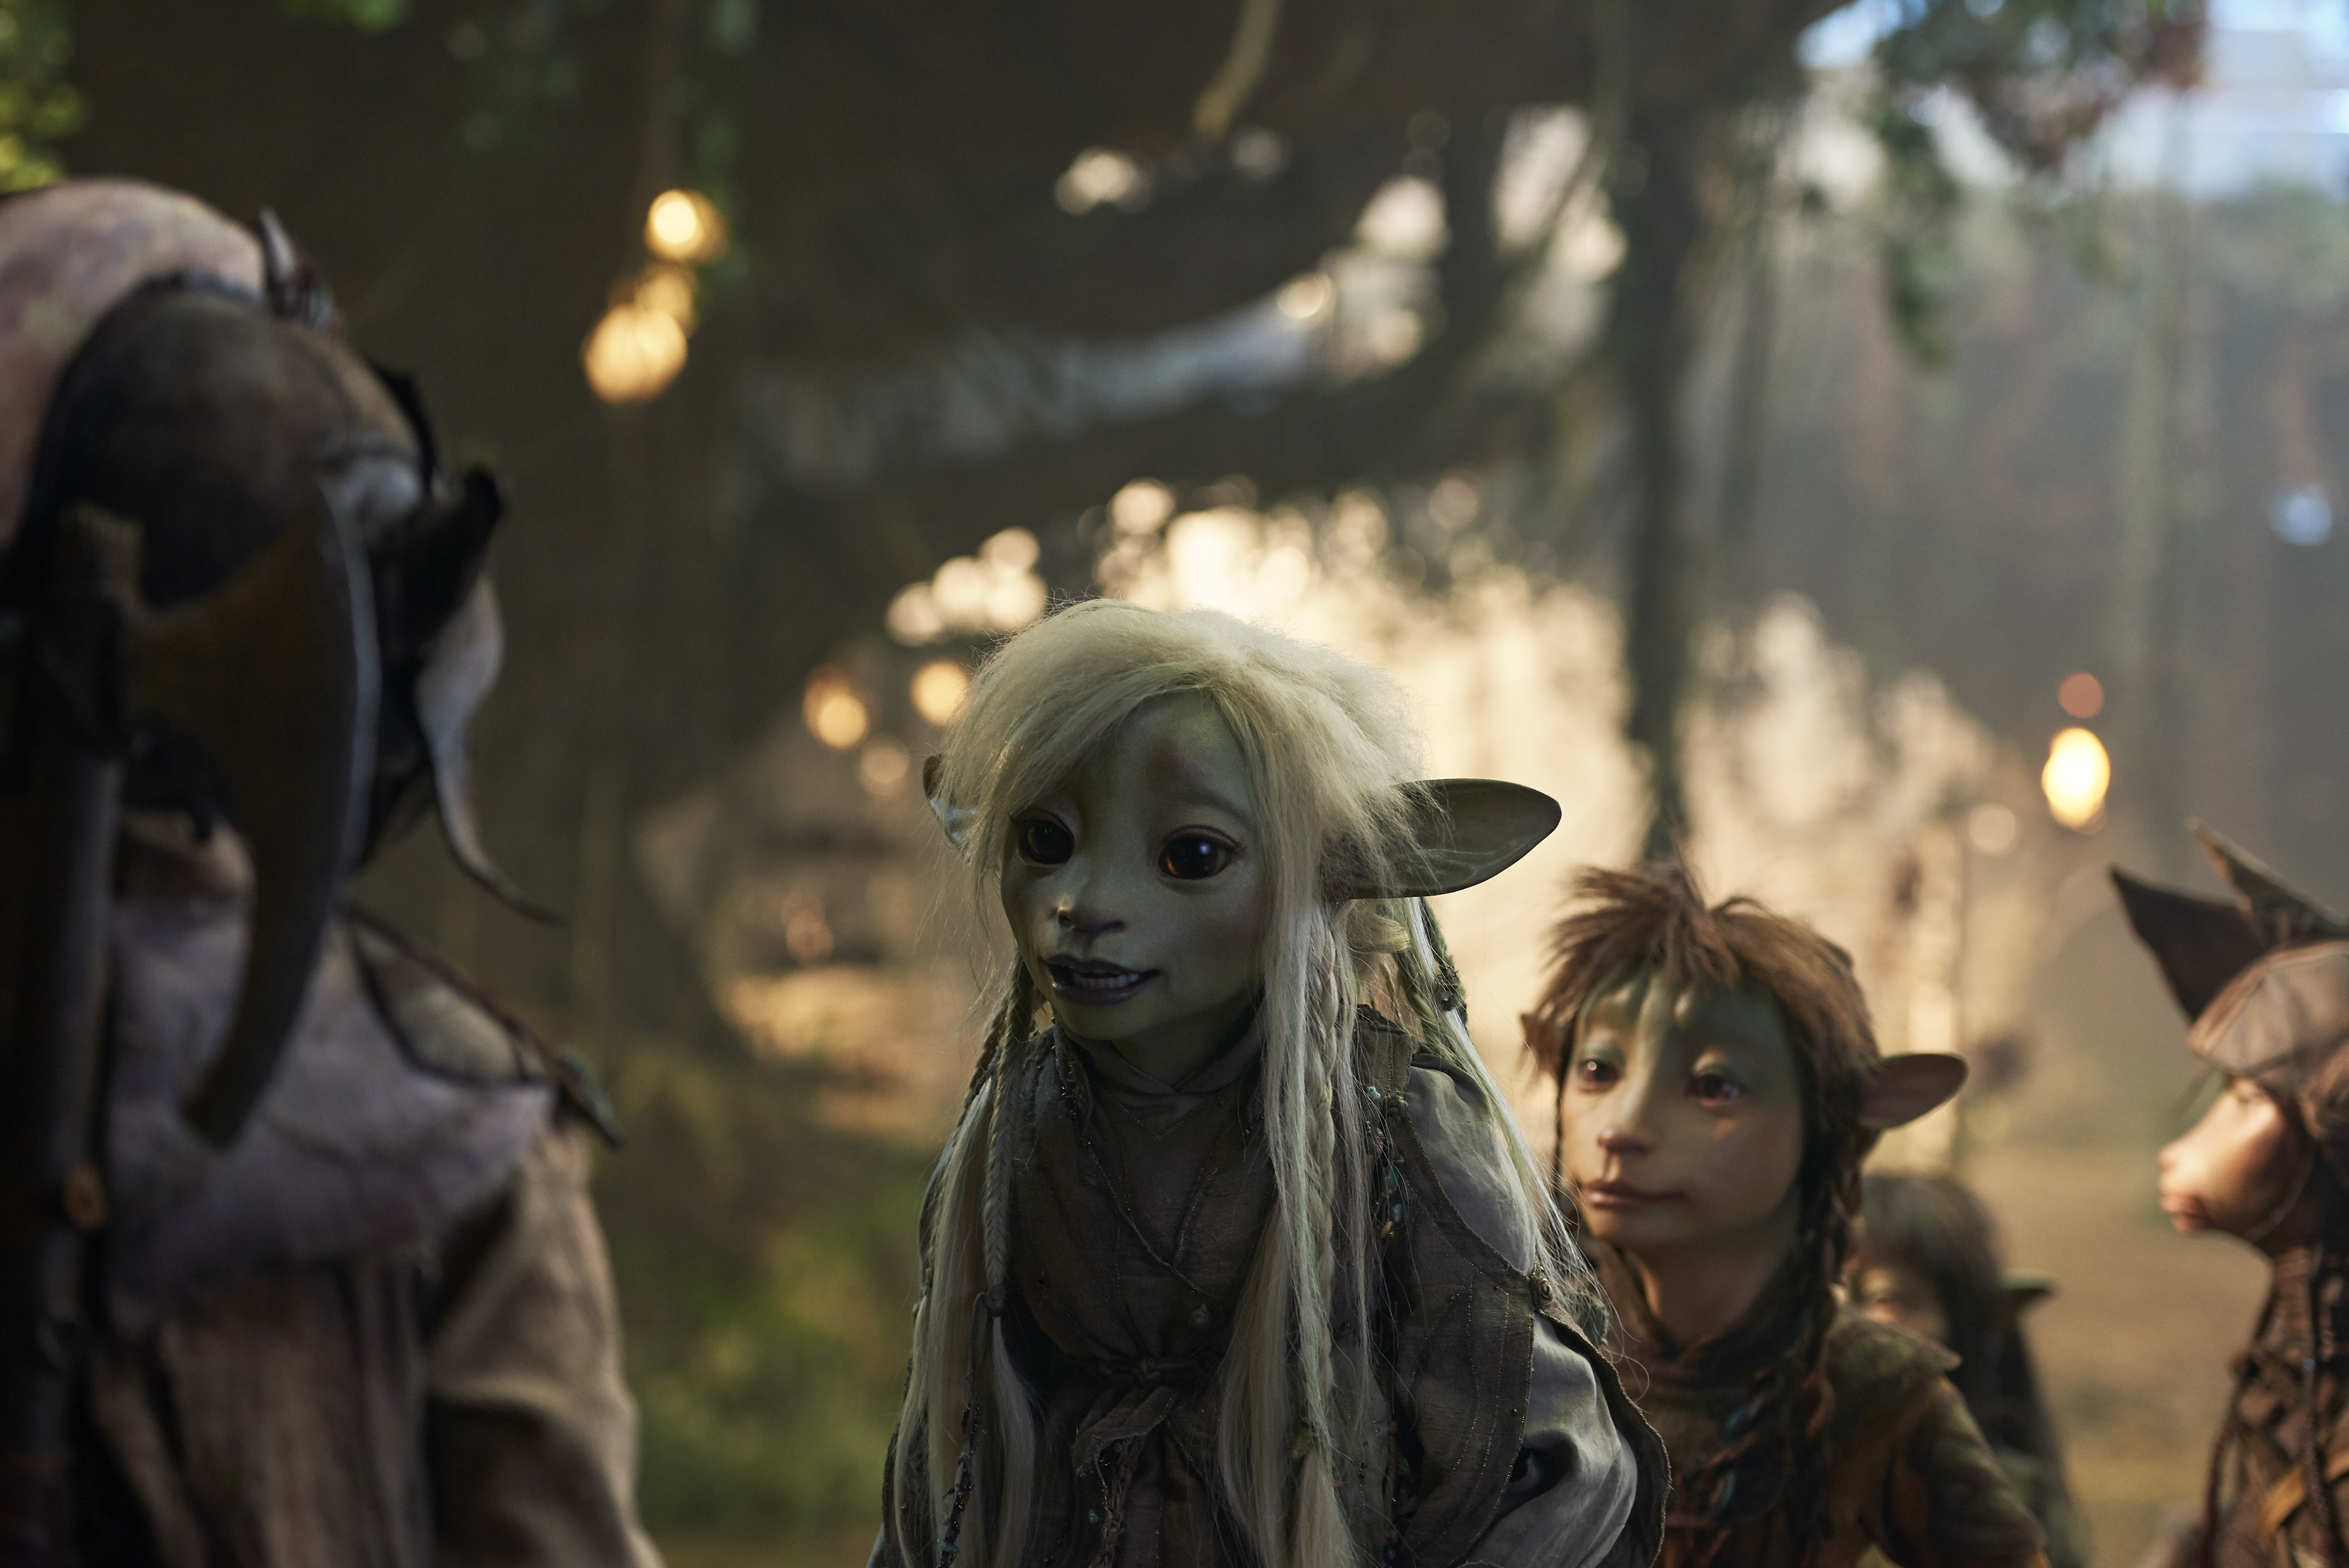 A still from The Dark Crystal: Age of Resistance featuring four characters talking to each other in a forest.